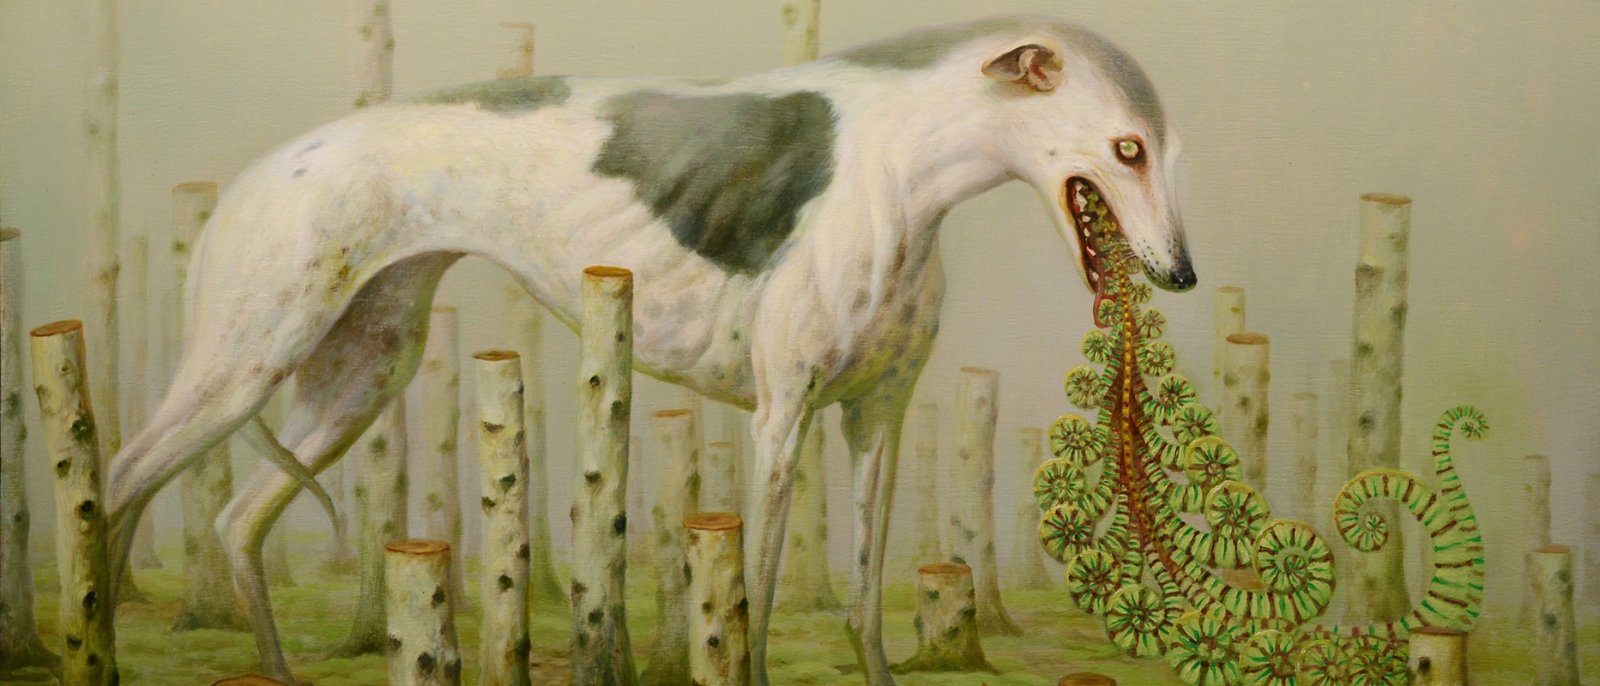 A painting of a dog with multiple green tongues 